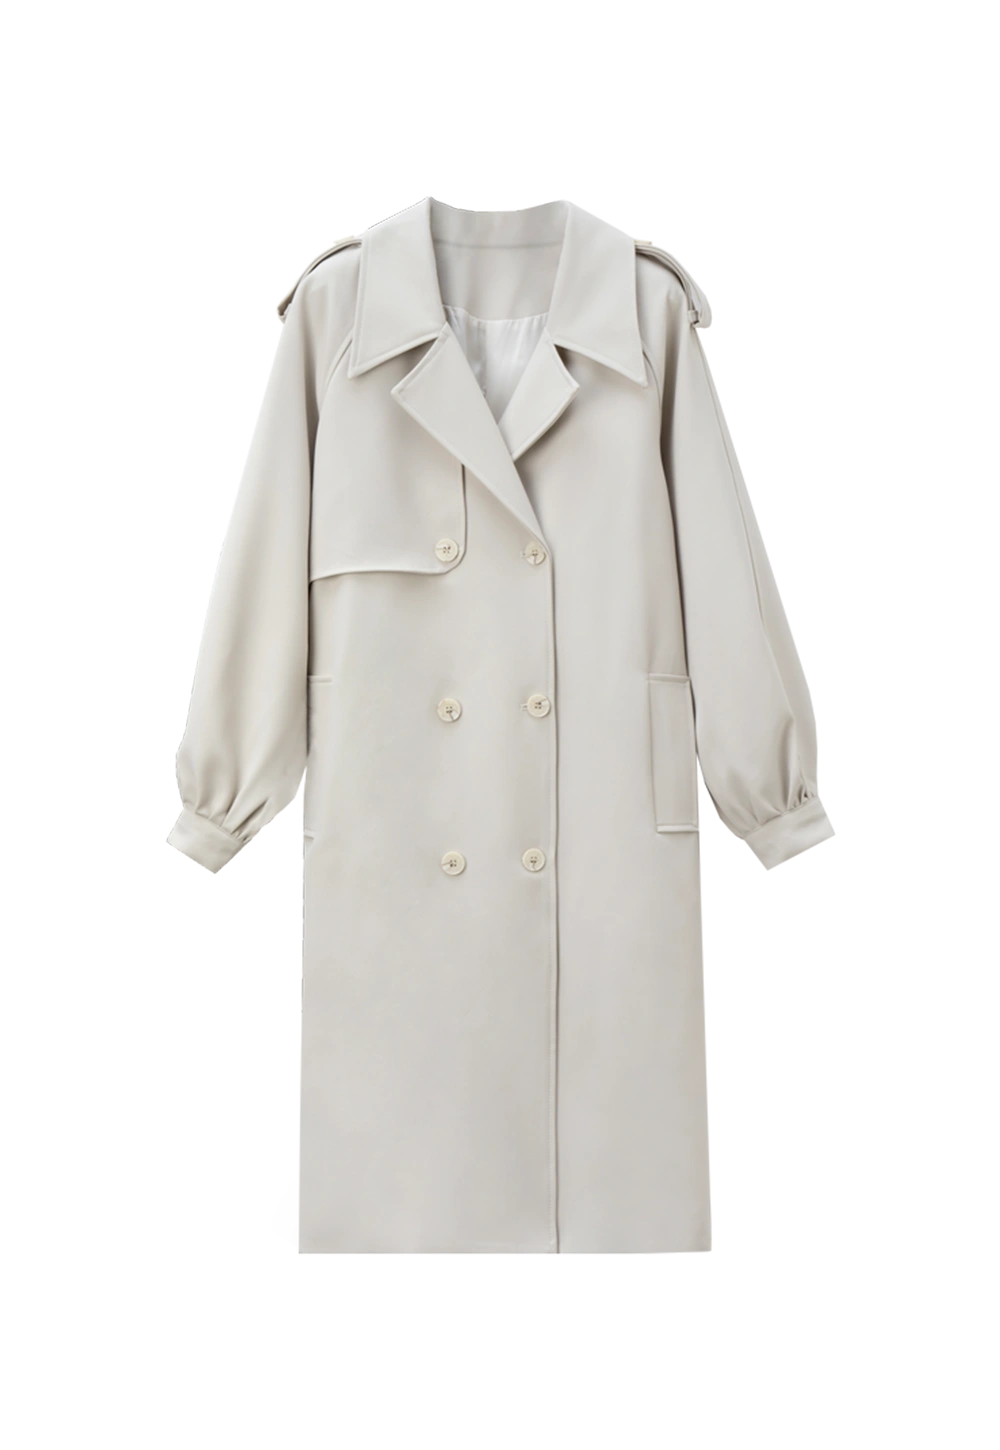 Elegant Women's Double-Breasted Trench Coat